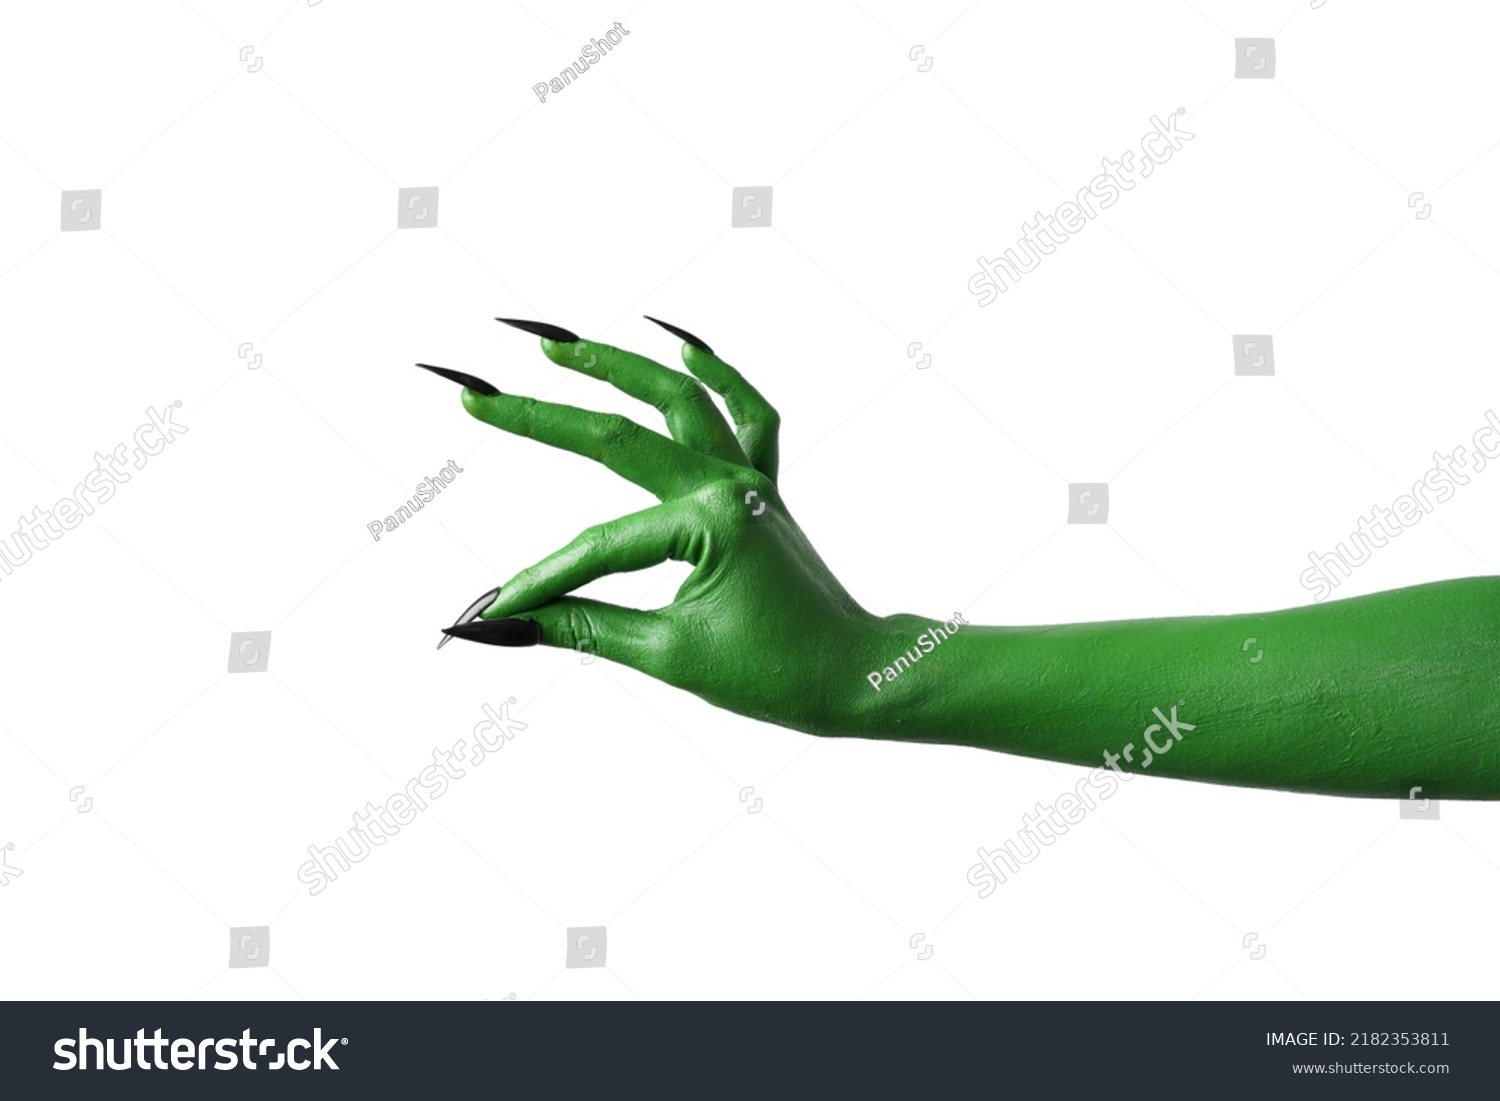 Halloween green color of witches, evil or zombie monster hand isolated on white background. #2182353811